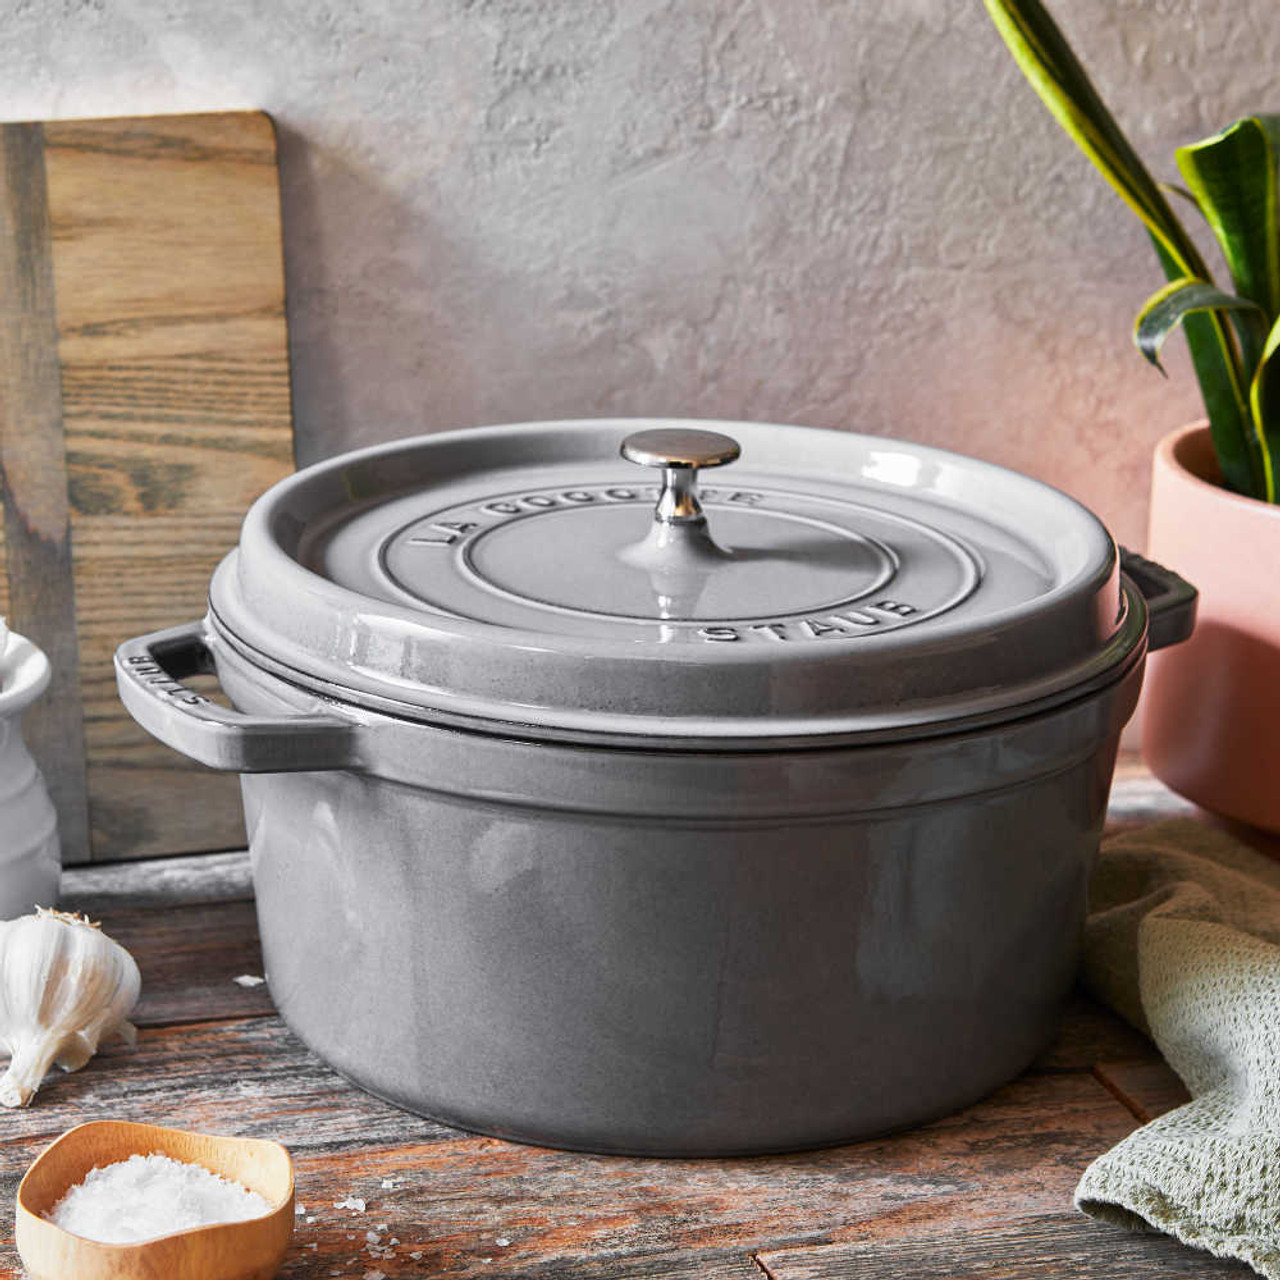 https://cdn11.bigcommerce.com/s-hccytny0od/images/stencil/1280x1280/products/5816/26575/Staub_Cast_Iron_Round_Cocotte_in_Graphite_Grey_1__06932.1702421990.jpg?c=2?imbypass=on